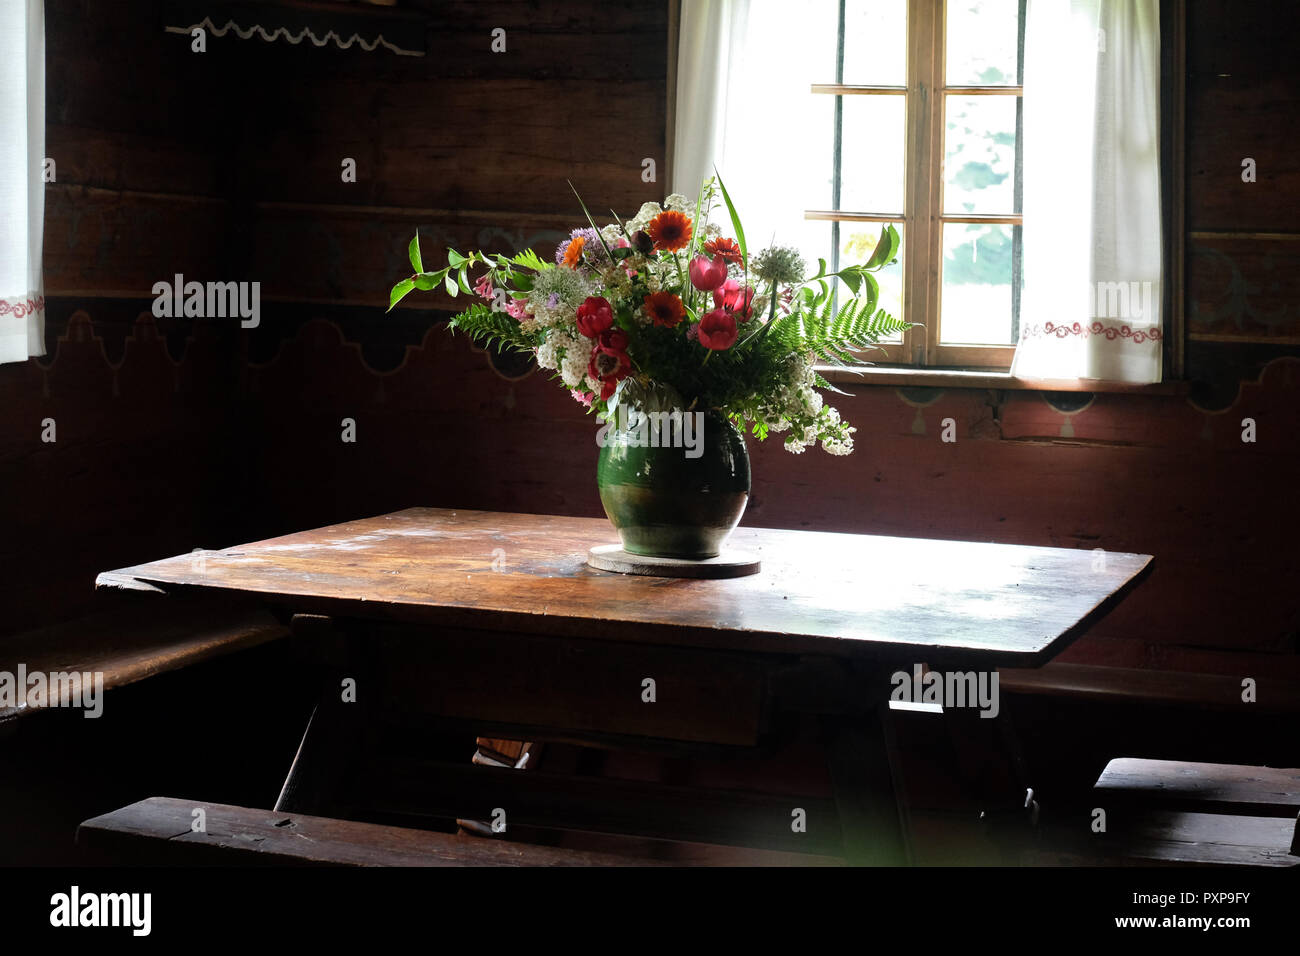 WELCOME . FLOWER BOUQUET IN OLD FARMHOUSE Stock Photo